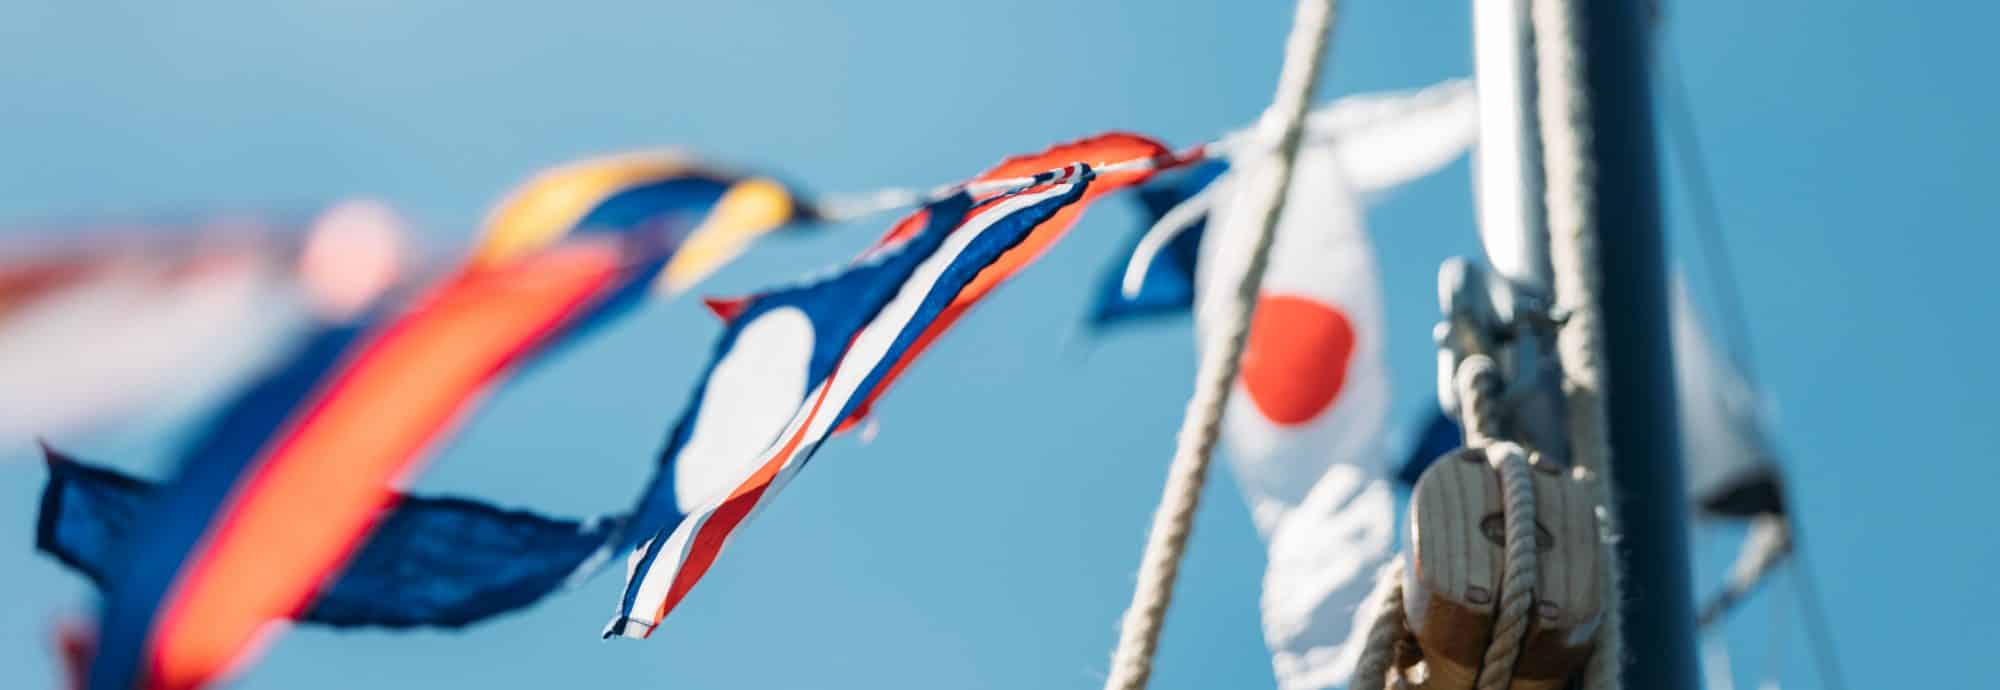 Photo of a row of flags fluttering in the wind.